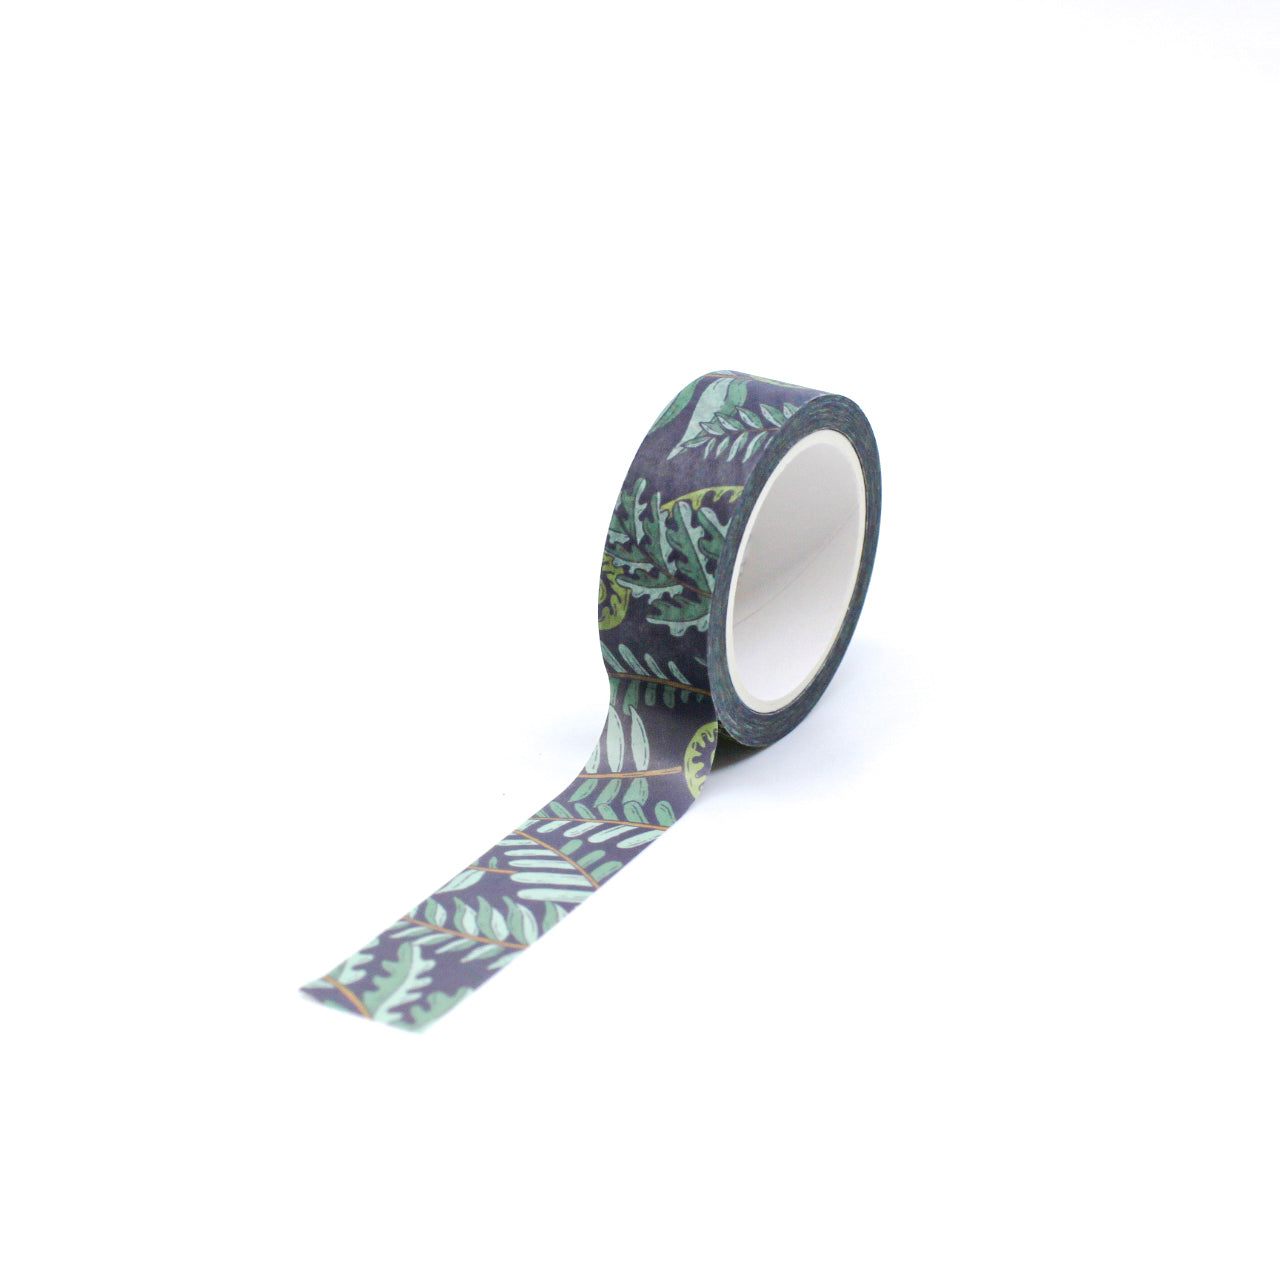 Forest Fern Washi Tape, featuring intricate fern designs, perfect for adding a touch of nature to your projects and crafts. This tape is sold at BBB Supplies Craft Shop and designed by Root & Branch Paper Co.